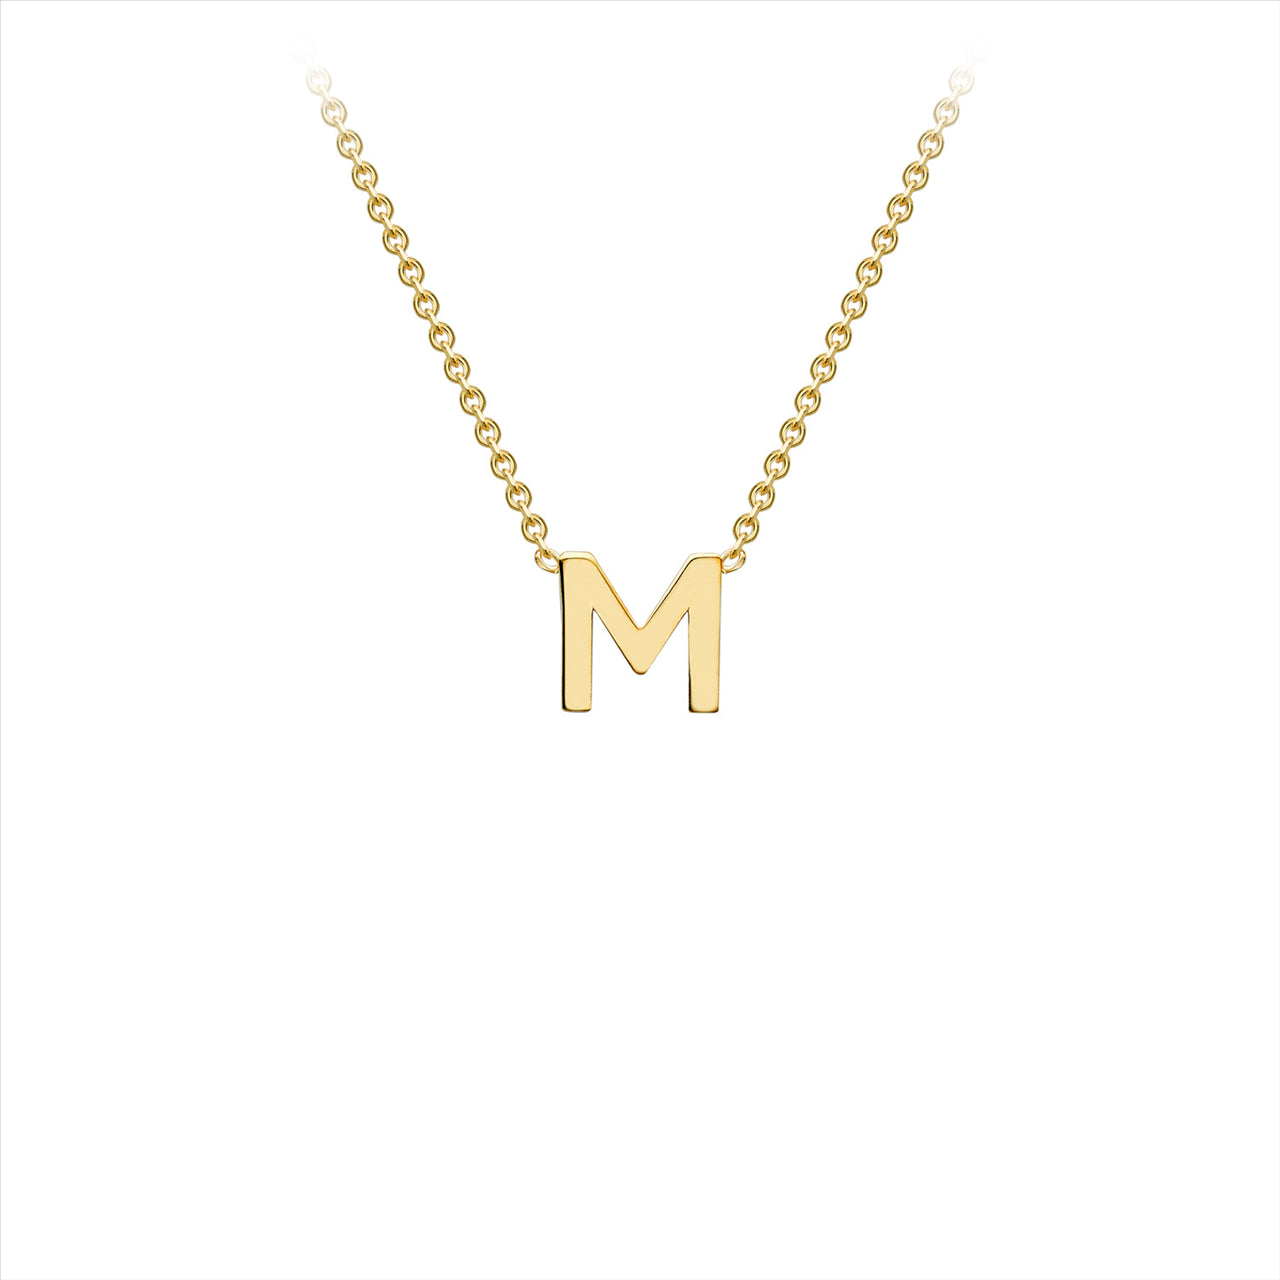 9K Yellow Gold 'M' Initial Adjustable Necklace 38cm-43cm